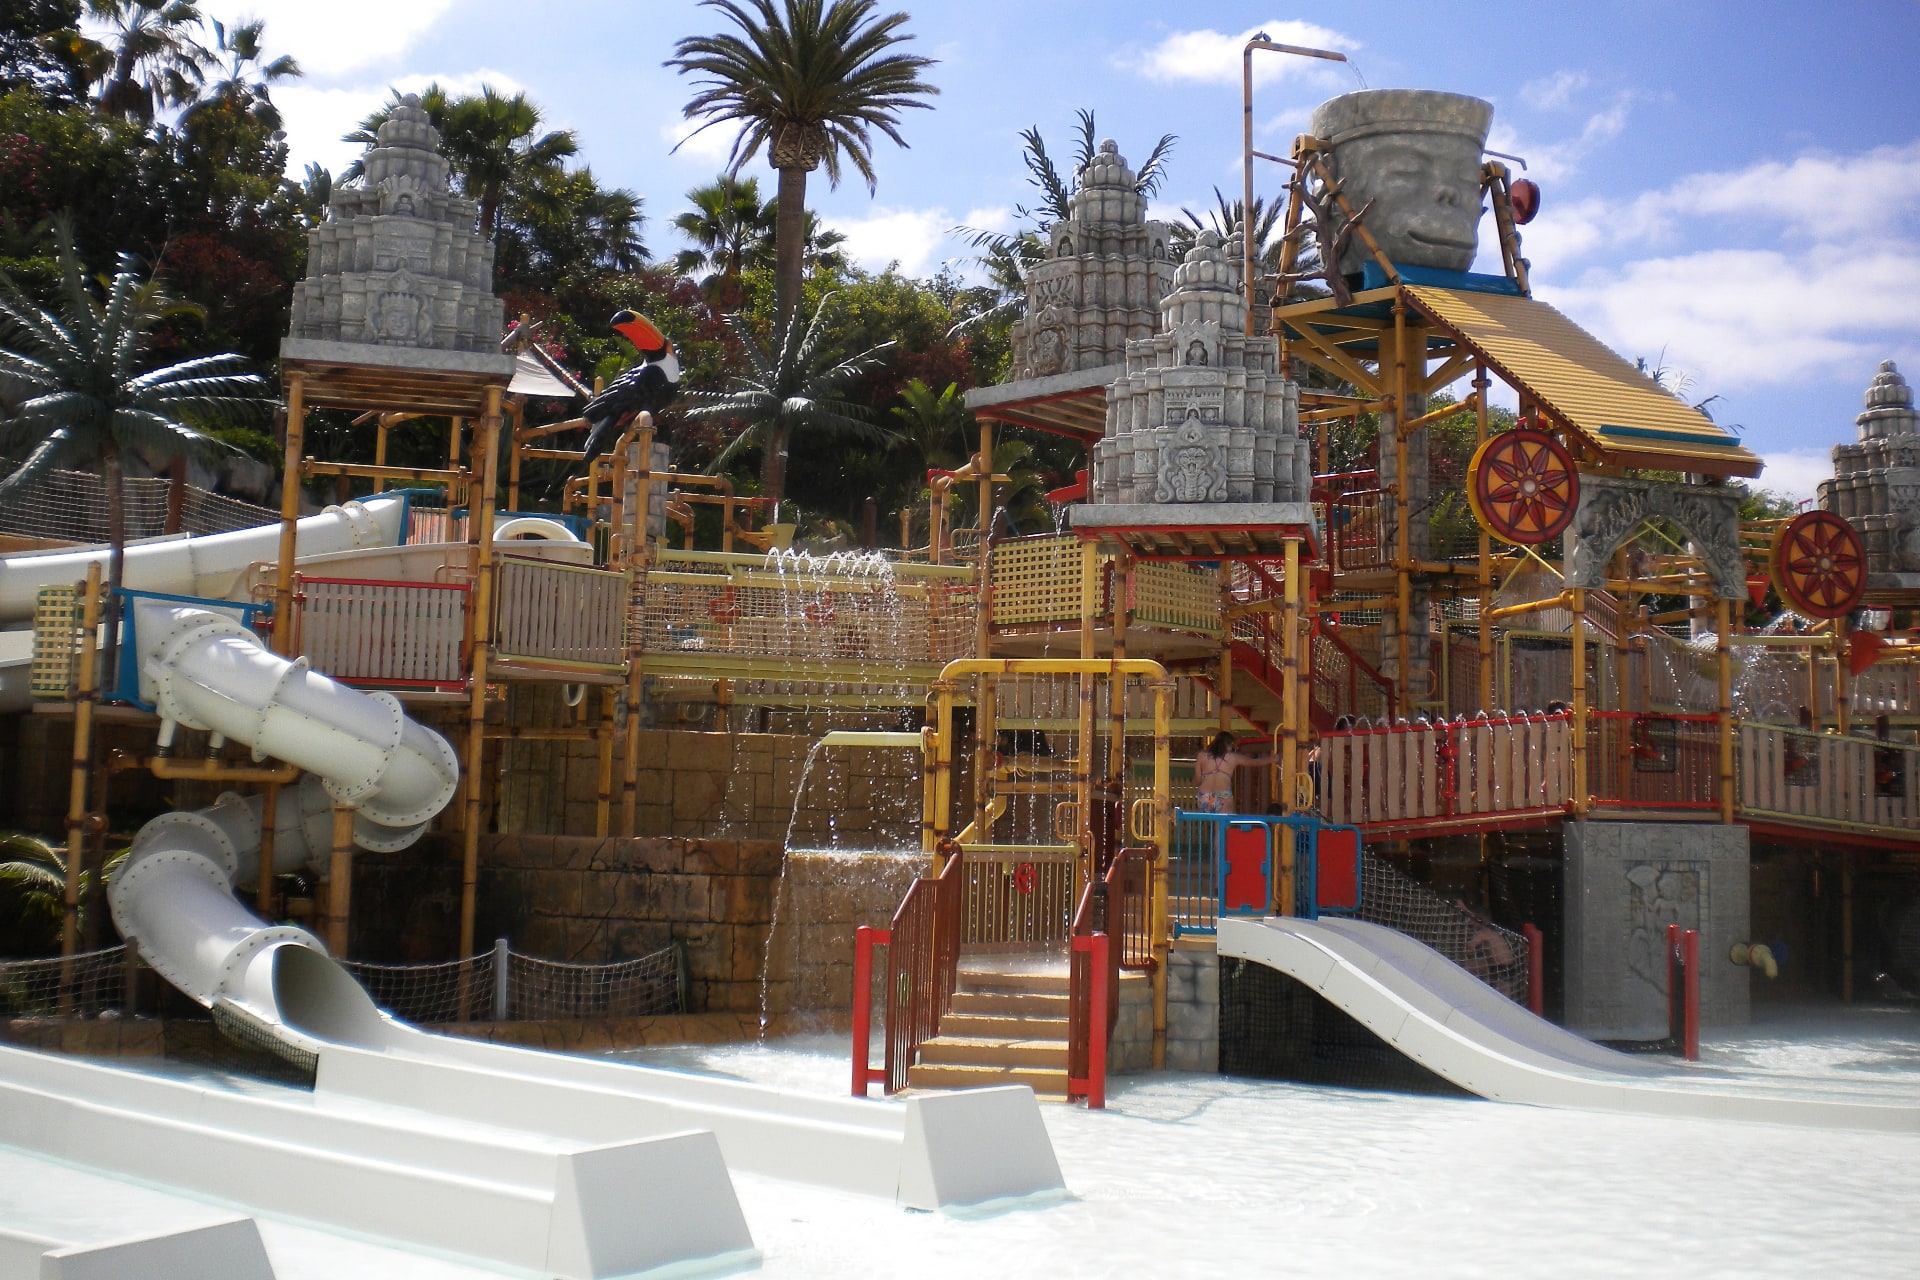 View of the Lost City attraction at Siam Park, Tenerife, with multiple water slides and pools